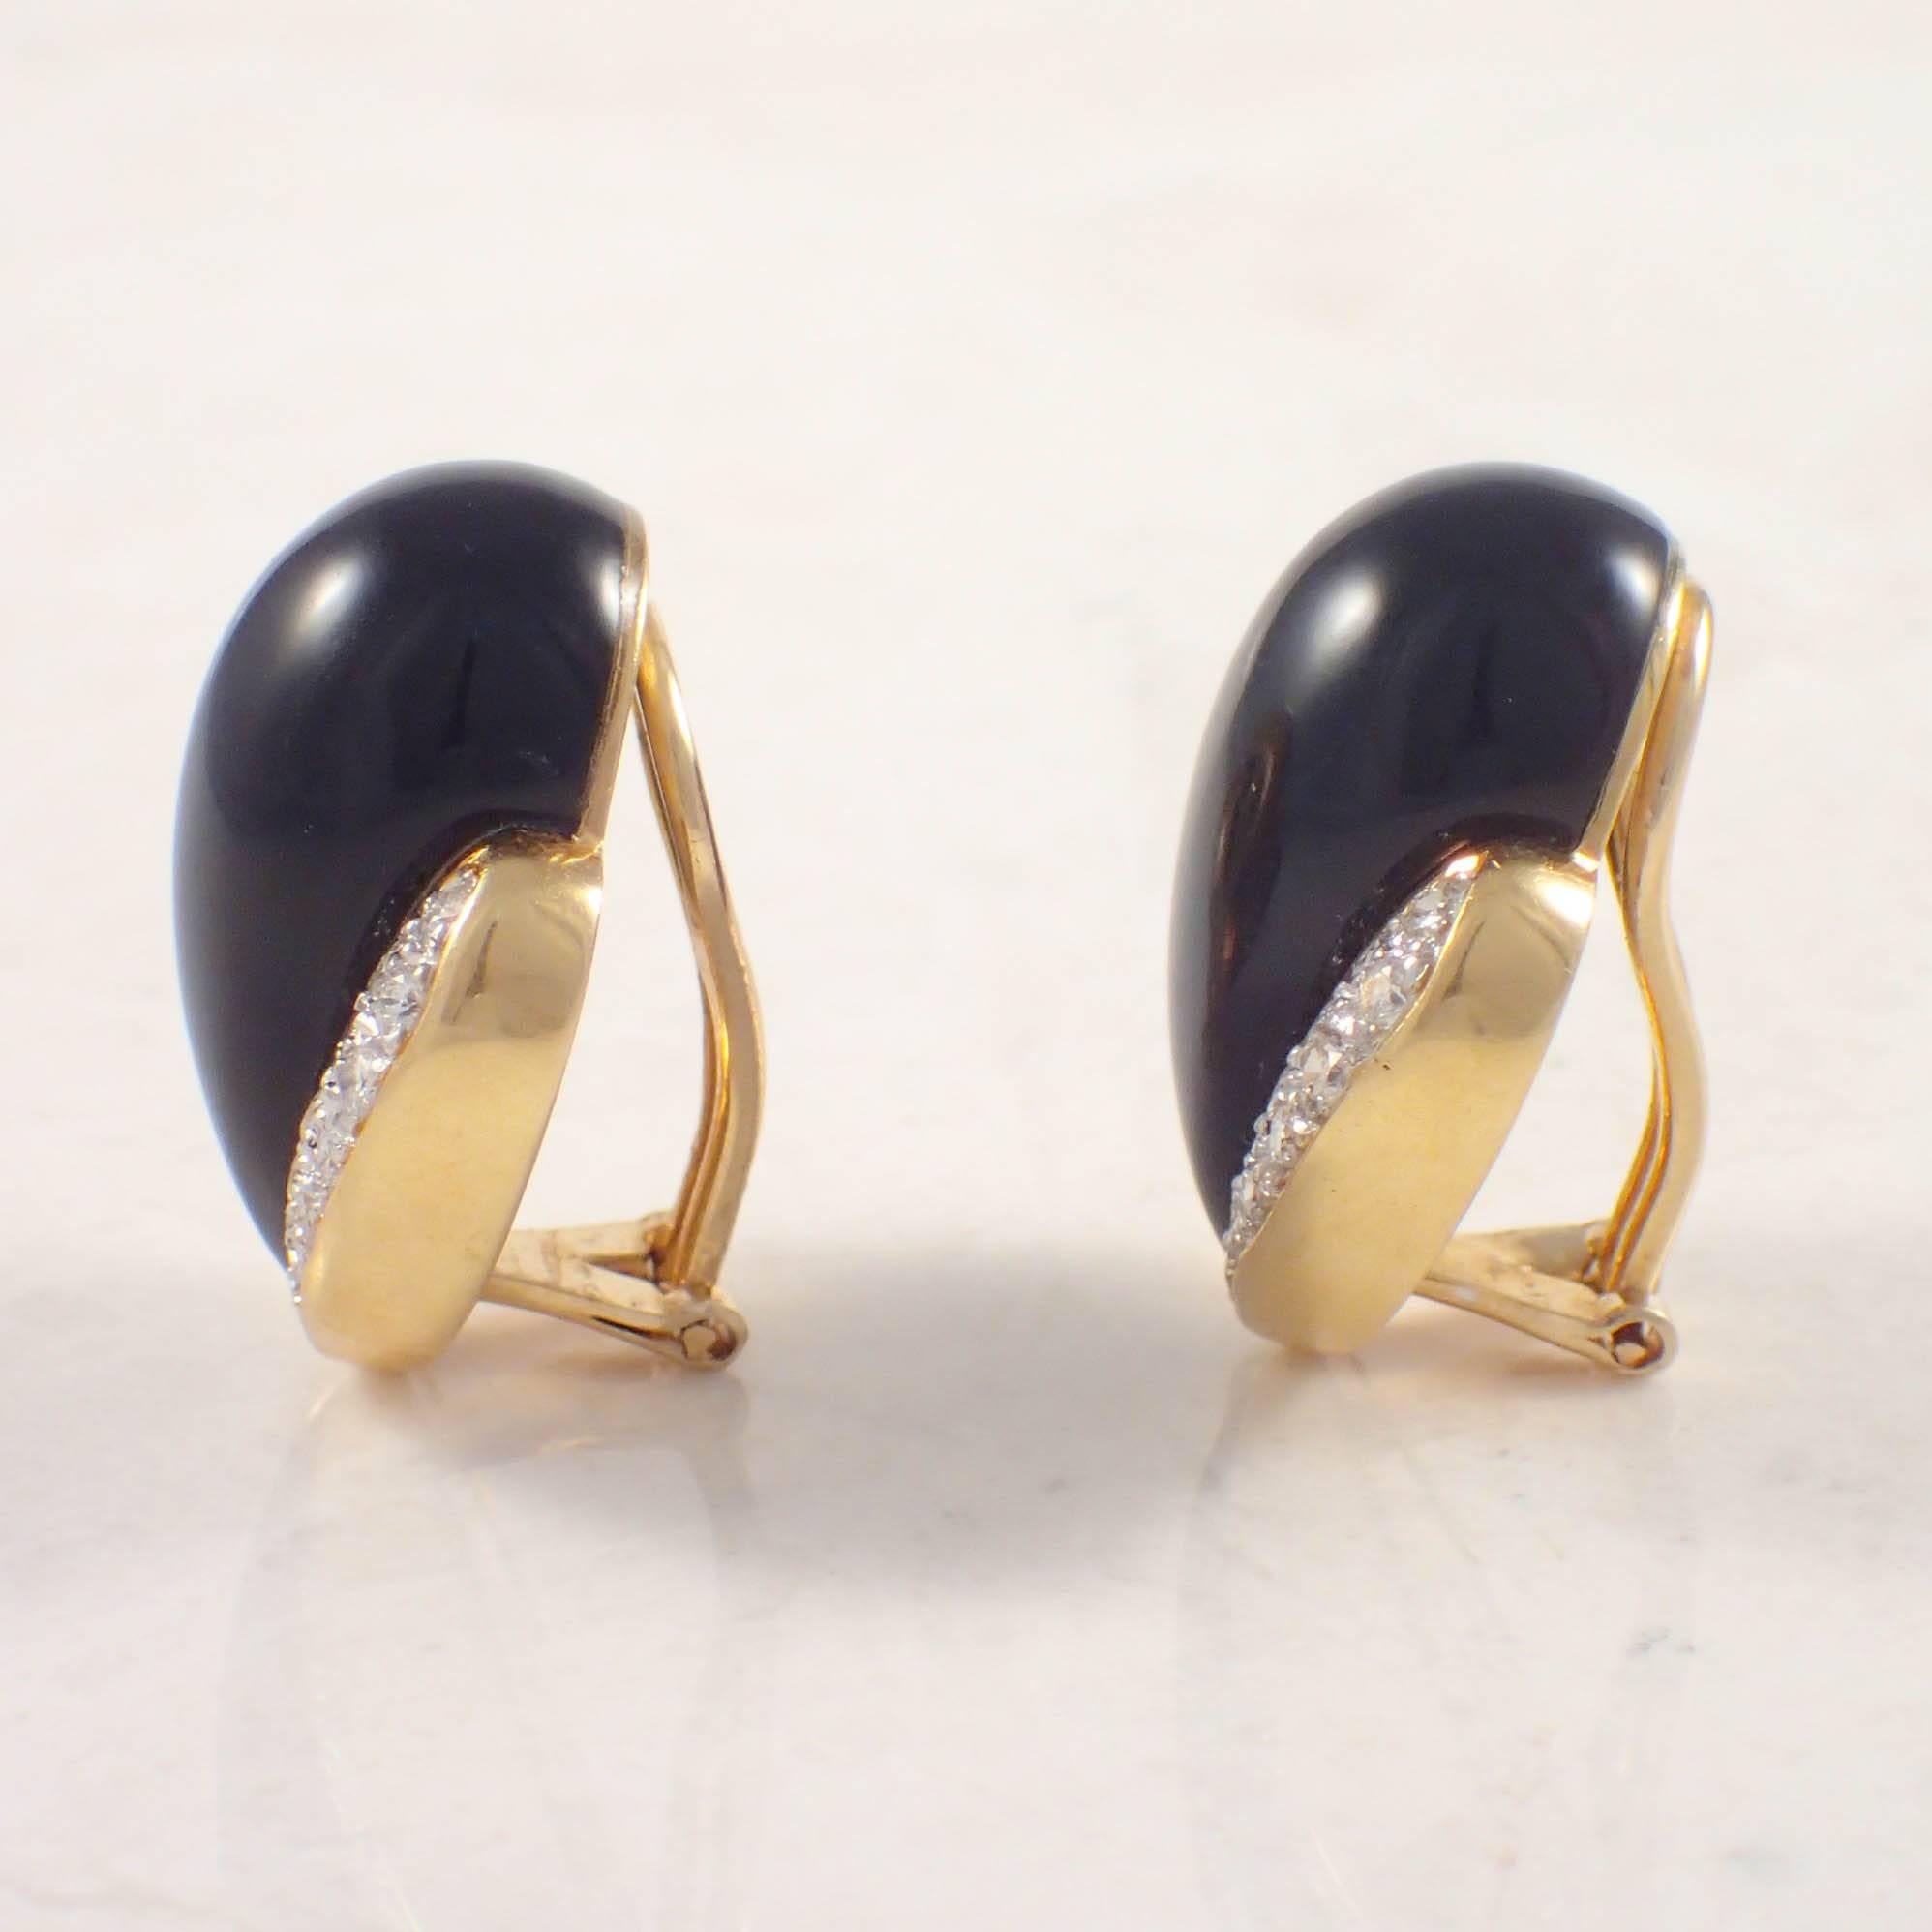 18K Yellow gold onyx and diamond clip earrings. The earrings are set with cabochon cut, pear shaped onyx pieces measuring 24 X 13 mm, accented by 44 round diamonds weighing approximately 1.50 carats total. The earrings weigh 20.2 grams. Circa